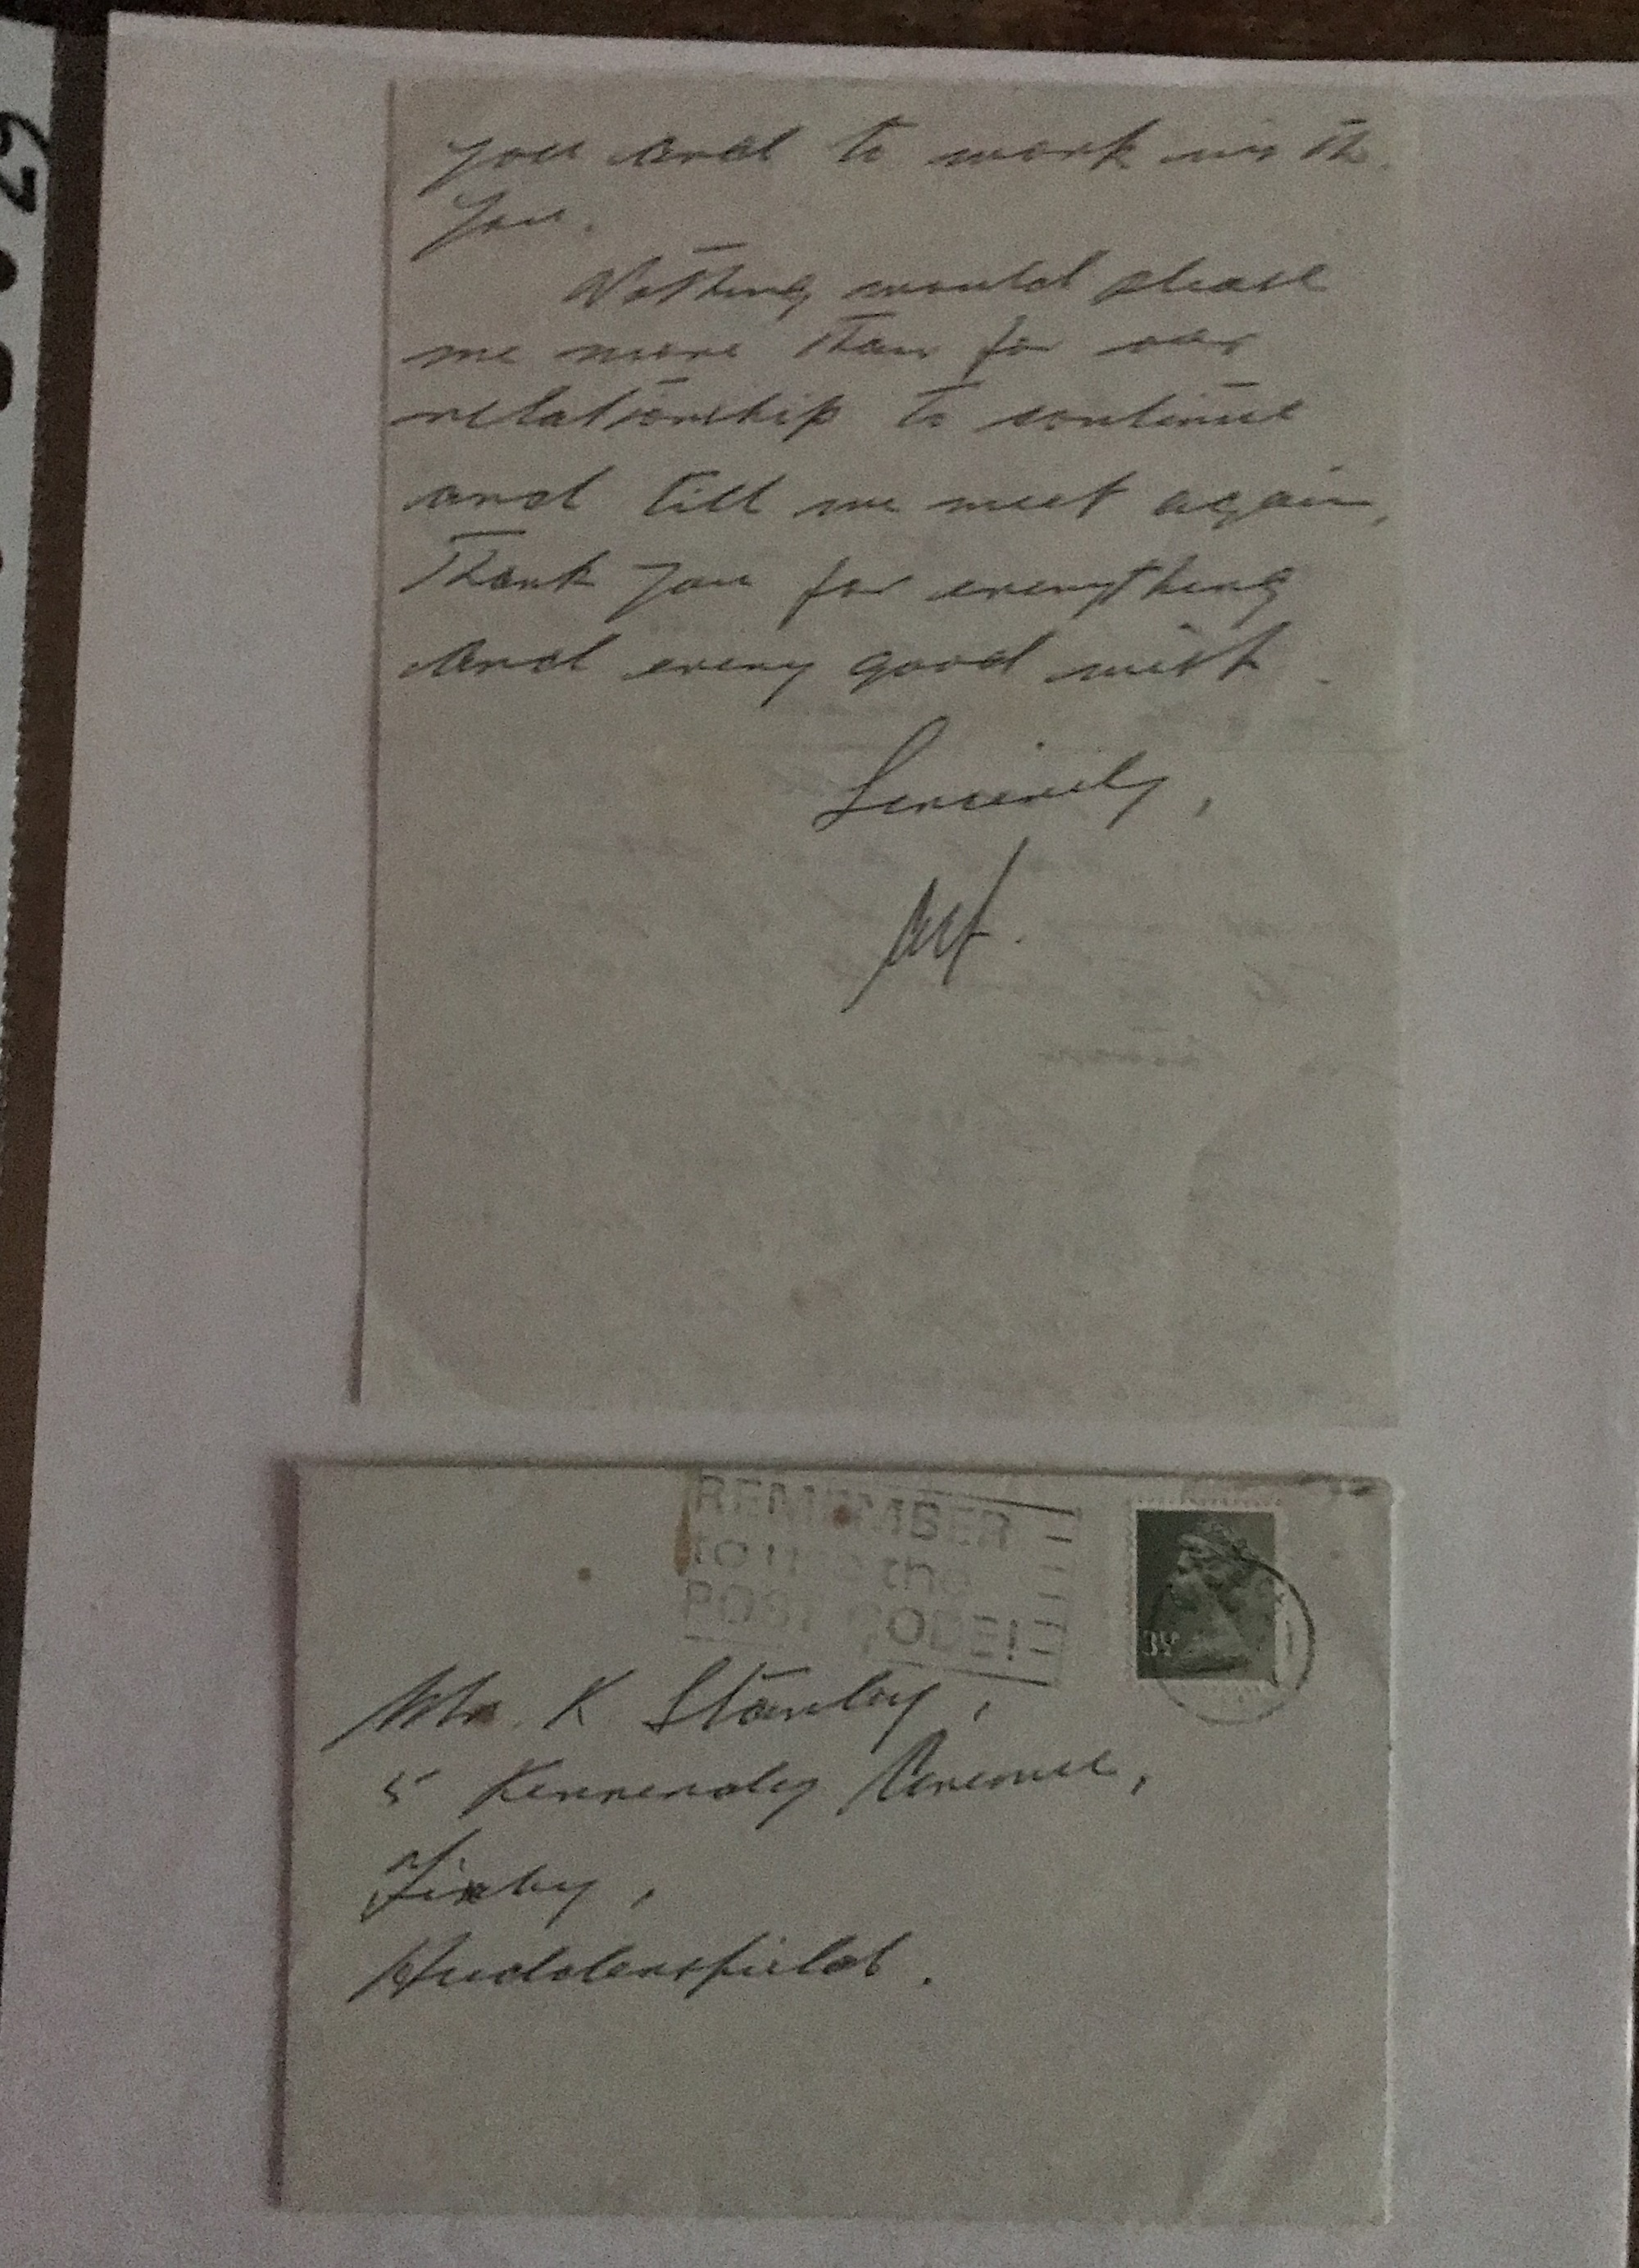 Sir Alf Ramsey two page handwritten letter and envelope 1974. Replying to a letter to Ken Stanley